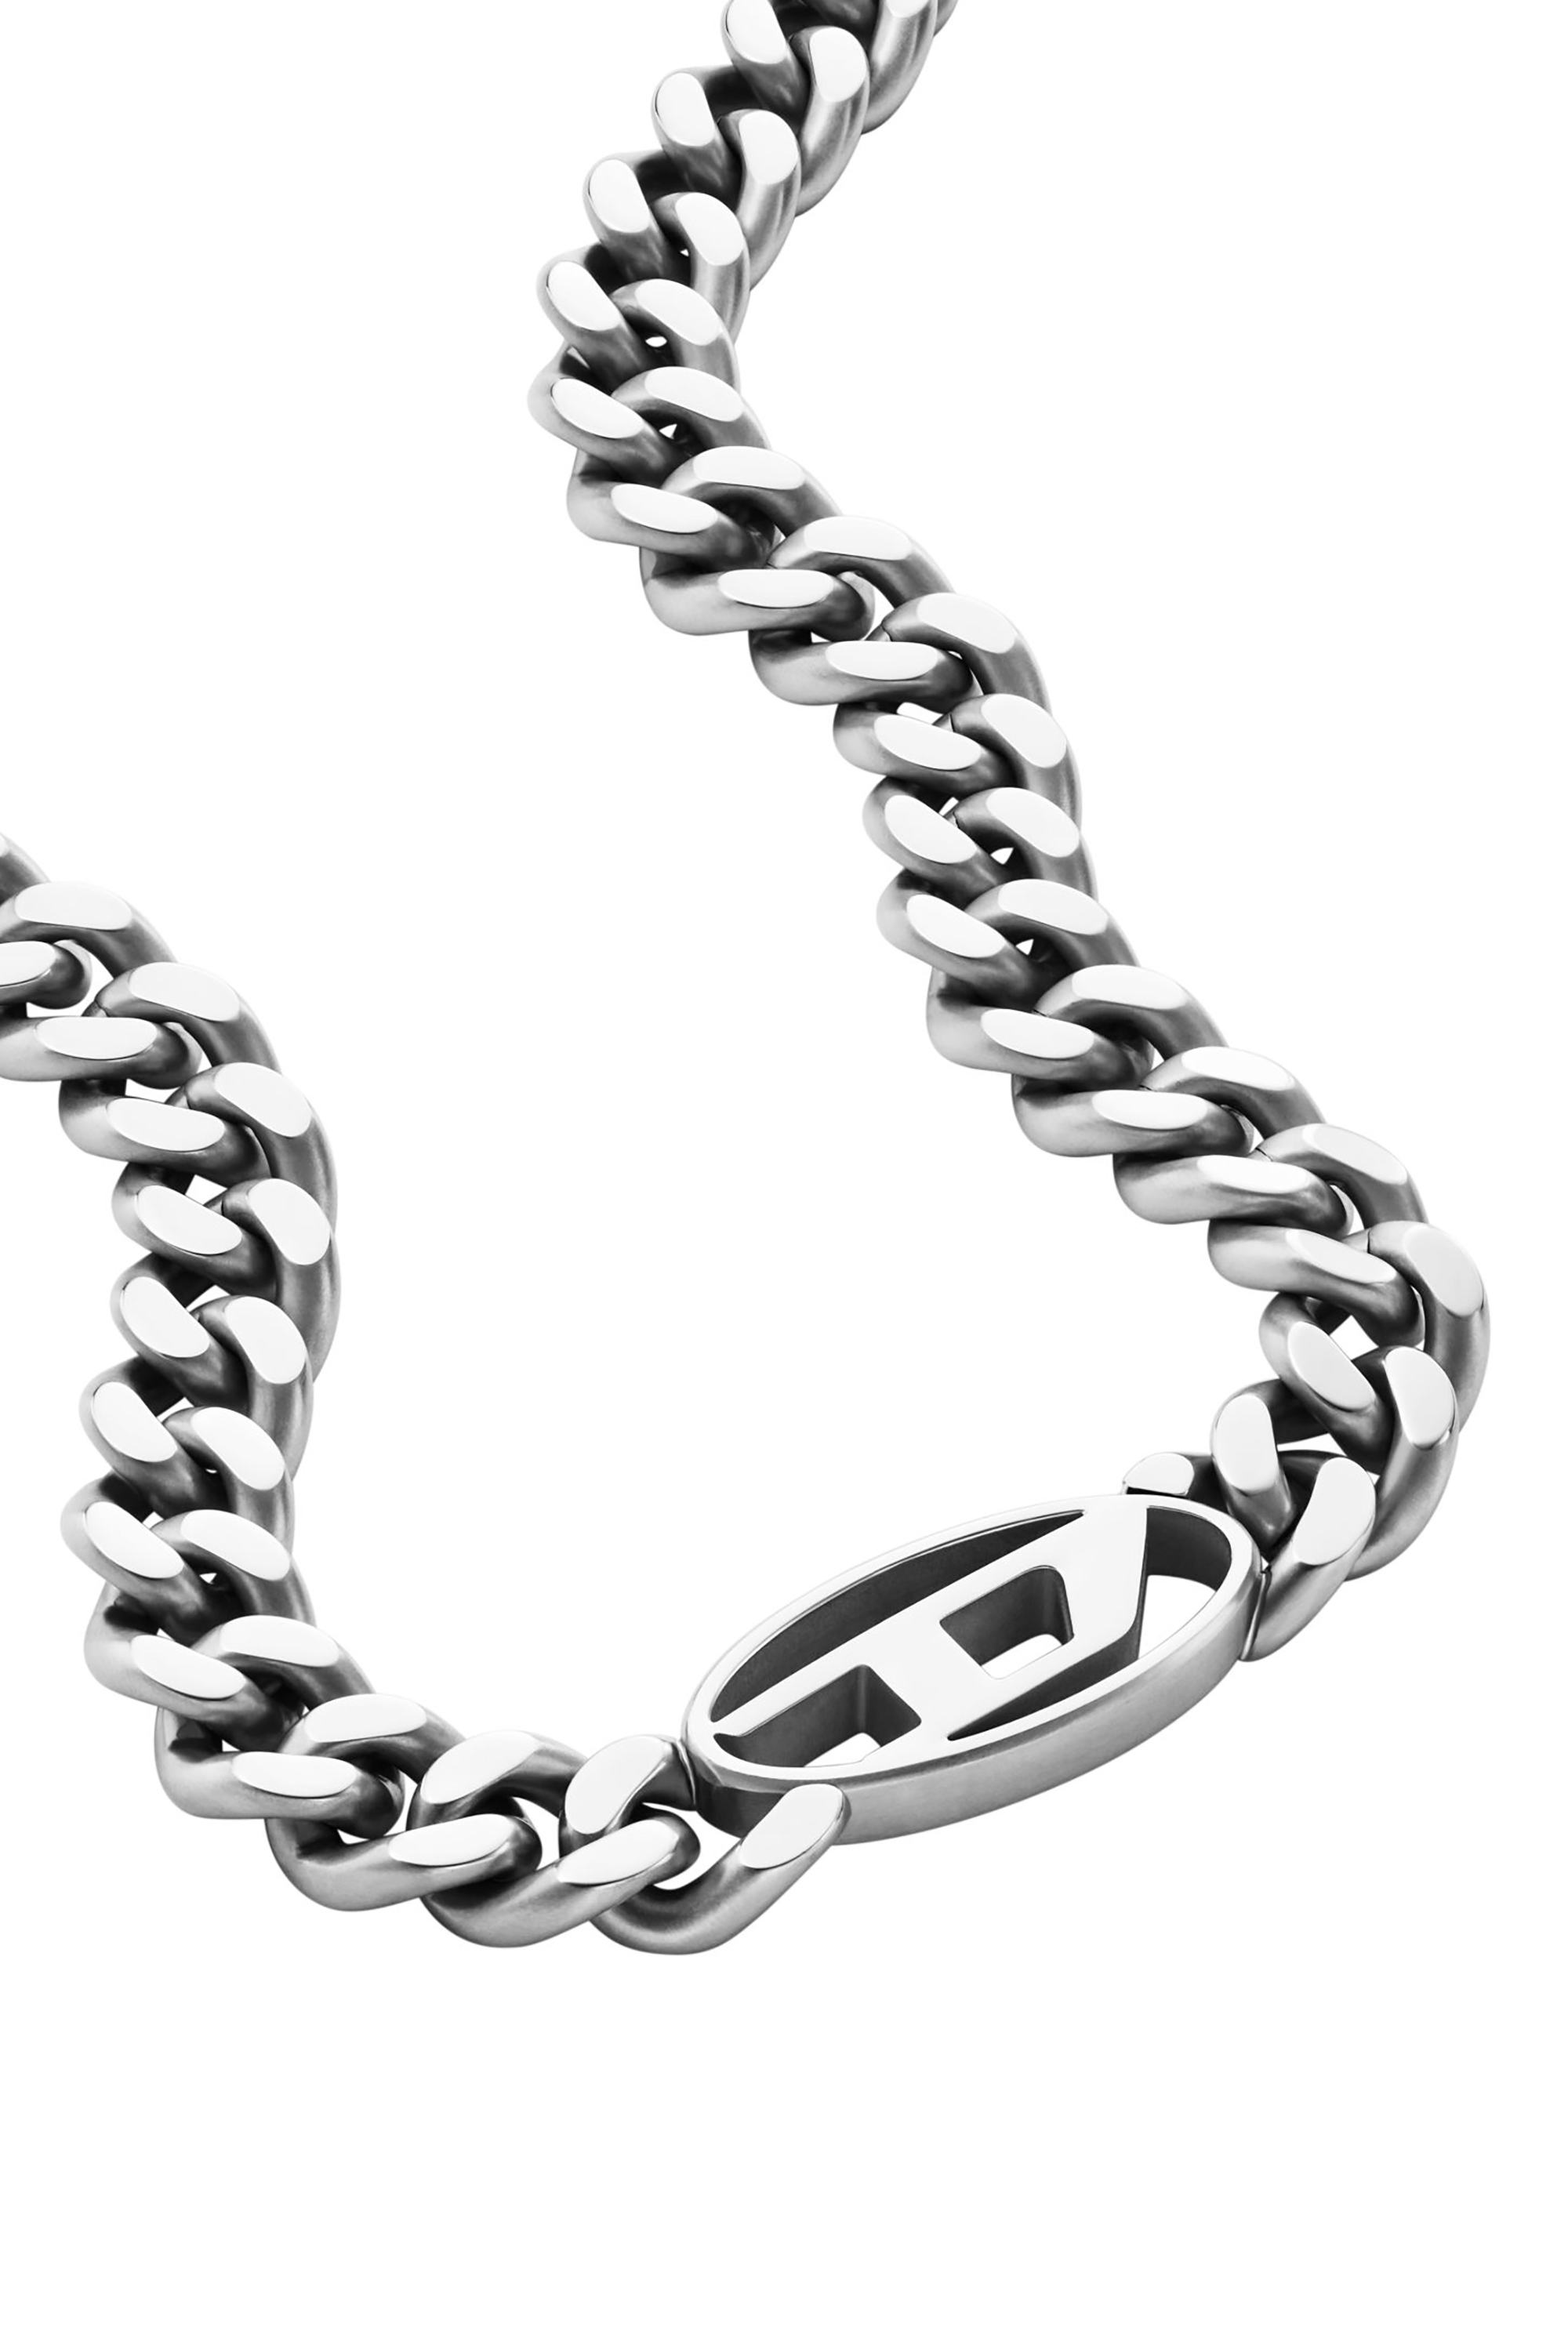 Men\'s Necklaces: Stainless Steel, Chain